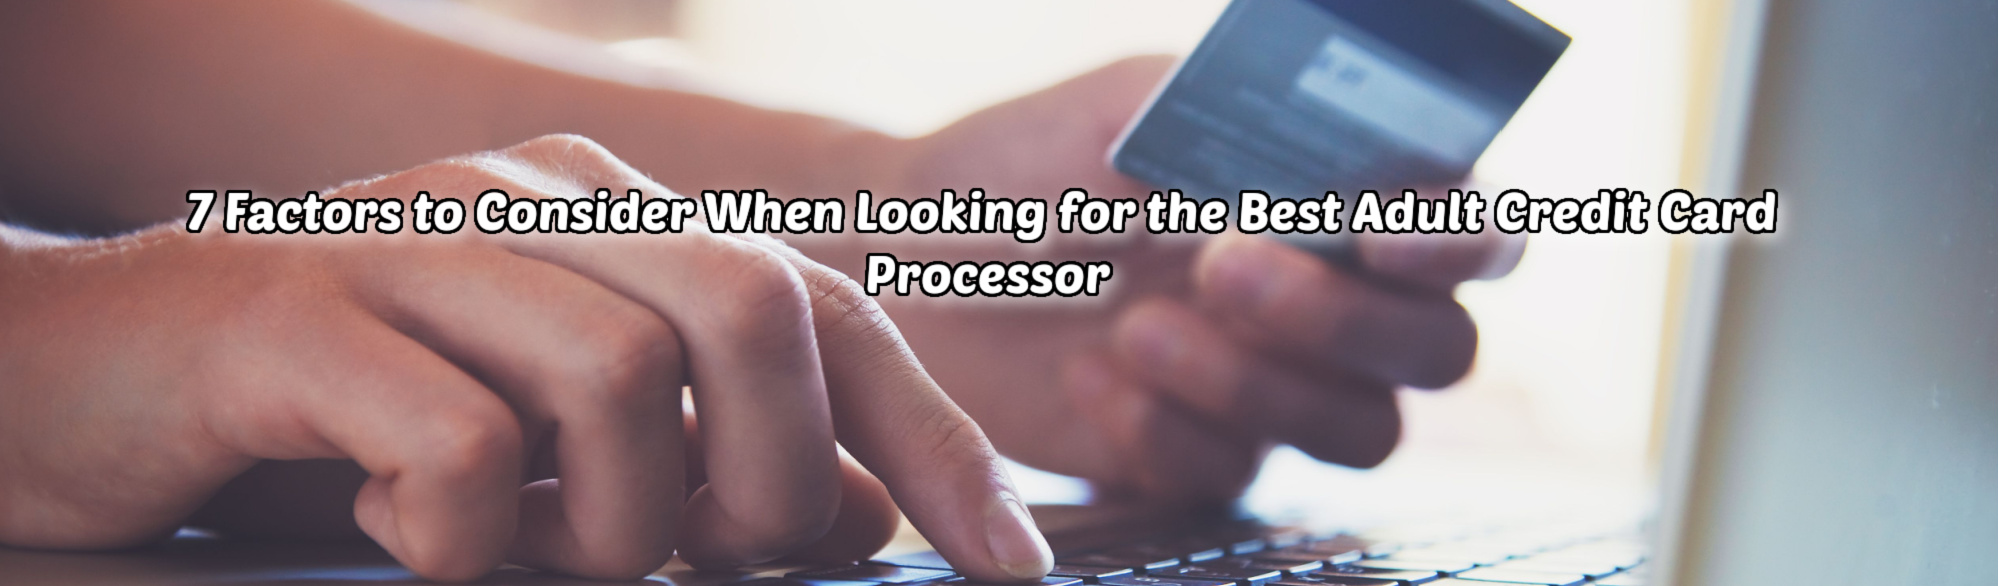 image of 7 factors to consider when looking for the best credit card processor